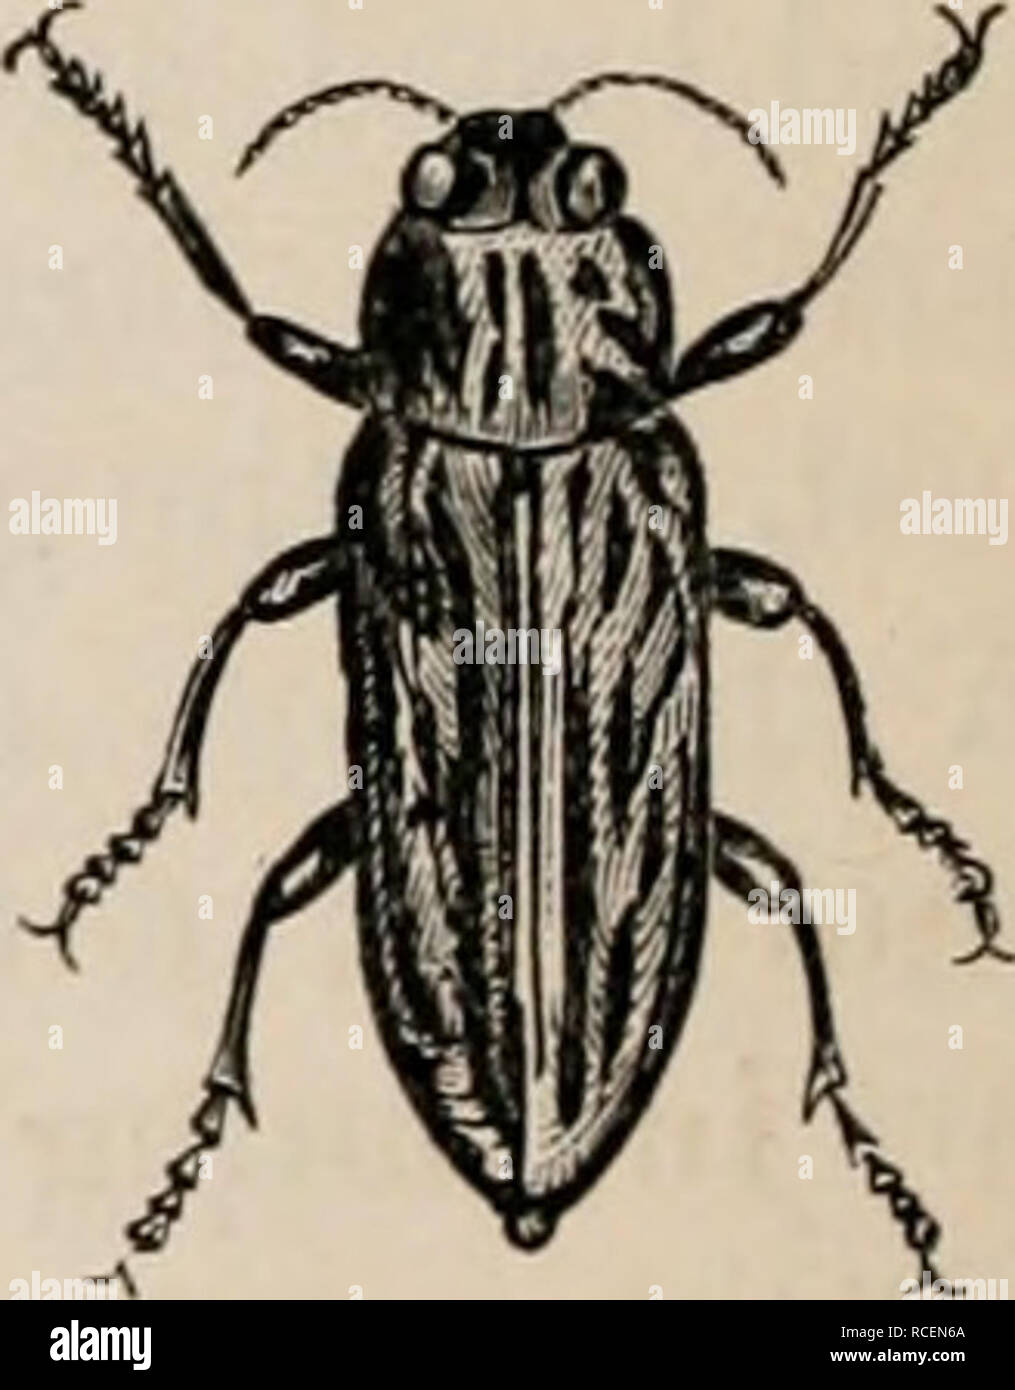 . Elements of zoölogy : a textbook. Zoology. FIG. 425.. Spring-Beetle, Elater oculatus, Linn. Buprestis, B. vir- ginica, Drury. their eyes, and which are very solid. Their lustre is me- tallic, more or less bronze-like. They are found on trees, and feio-n death when disturbed. In the larva state they O are borers. The Elaters or Elateridte have a hard body, and their head sunk, to the eyes, in the thorax, and the latter is as broad as any part of the body. In the larva state they are called wire-worms, and in this state they devour roots and wood. In the adult states they have attracted much a Stock Photo